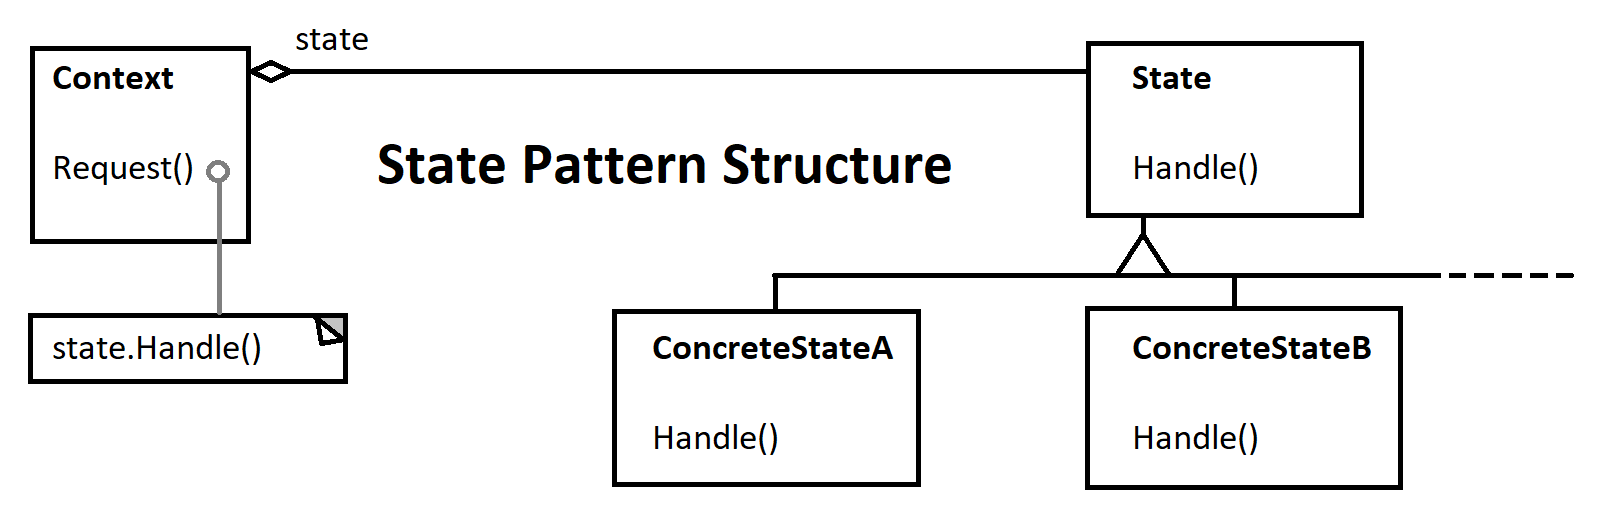 State Pattern Structure